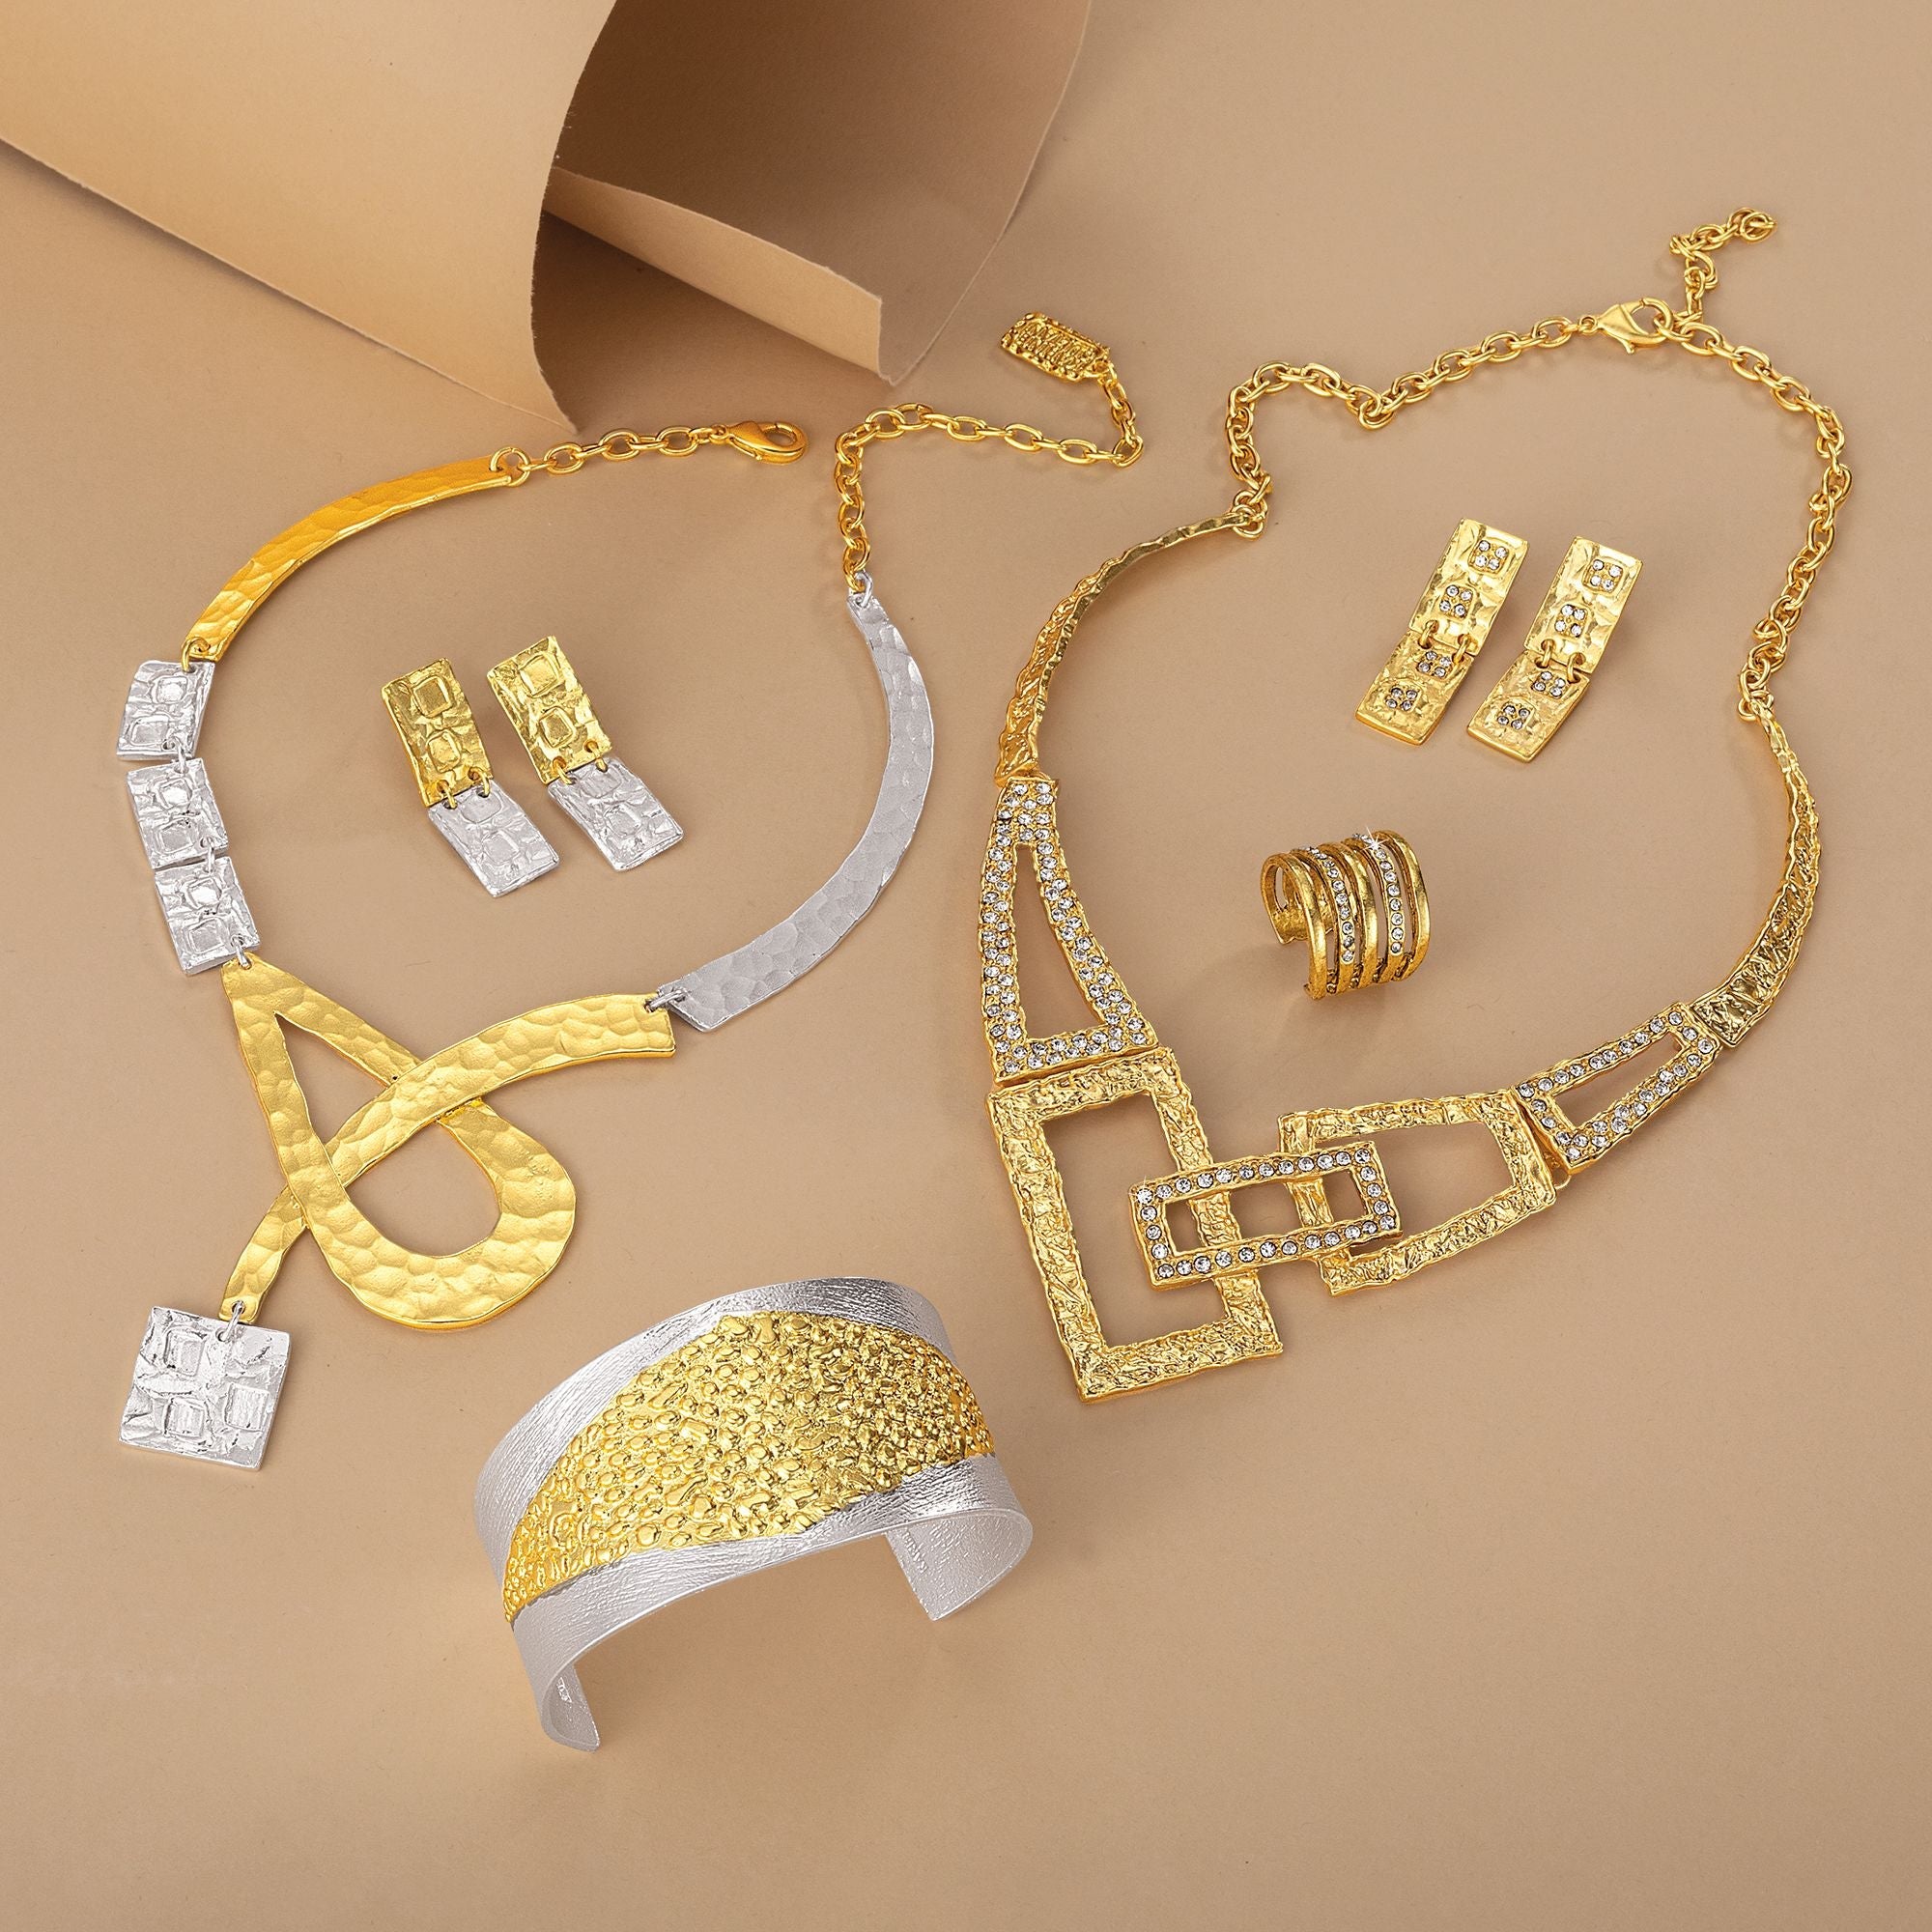 Gold & Silver Art Deco Statement Necklace